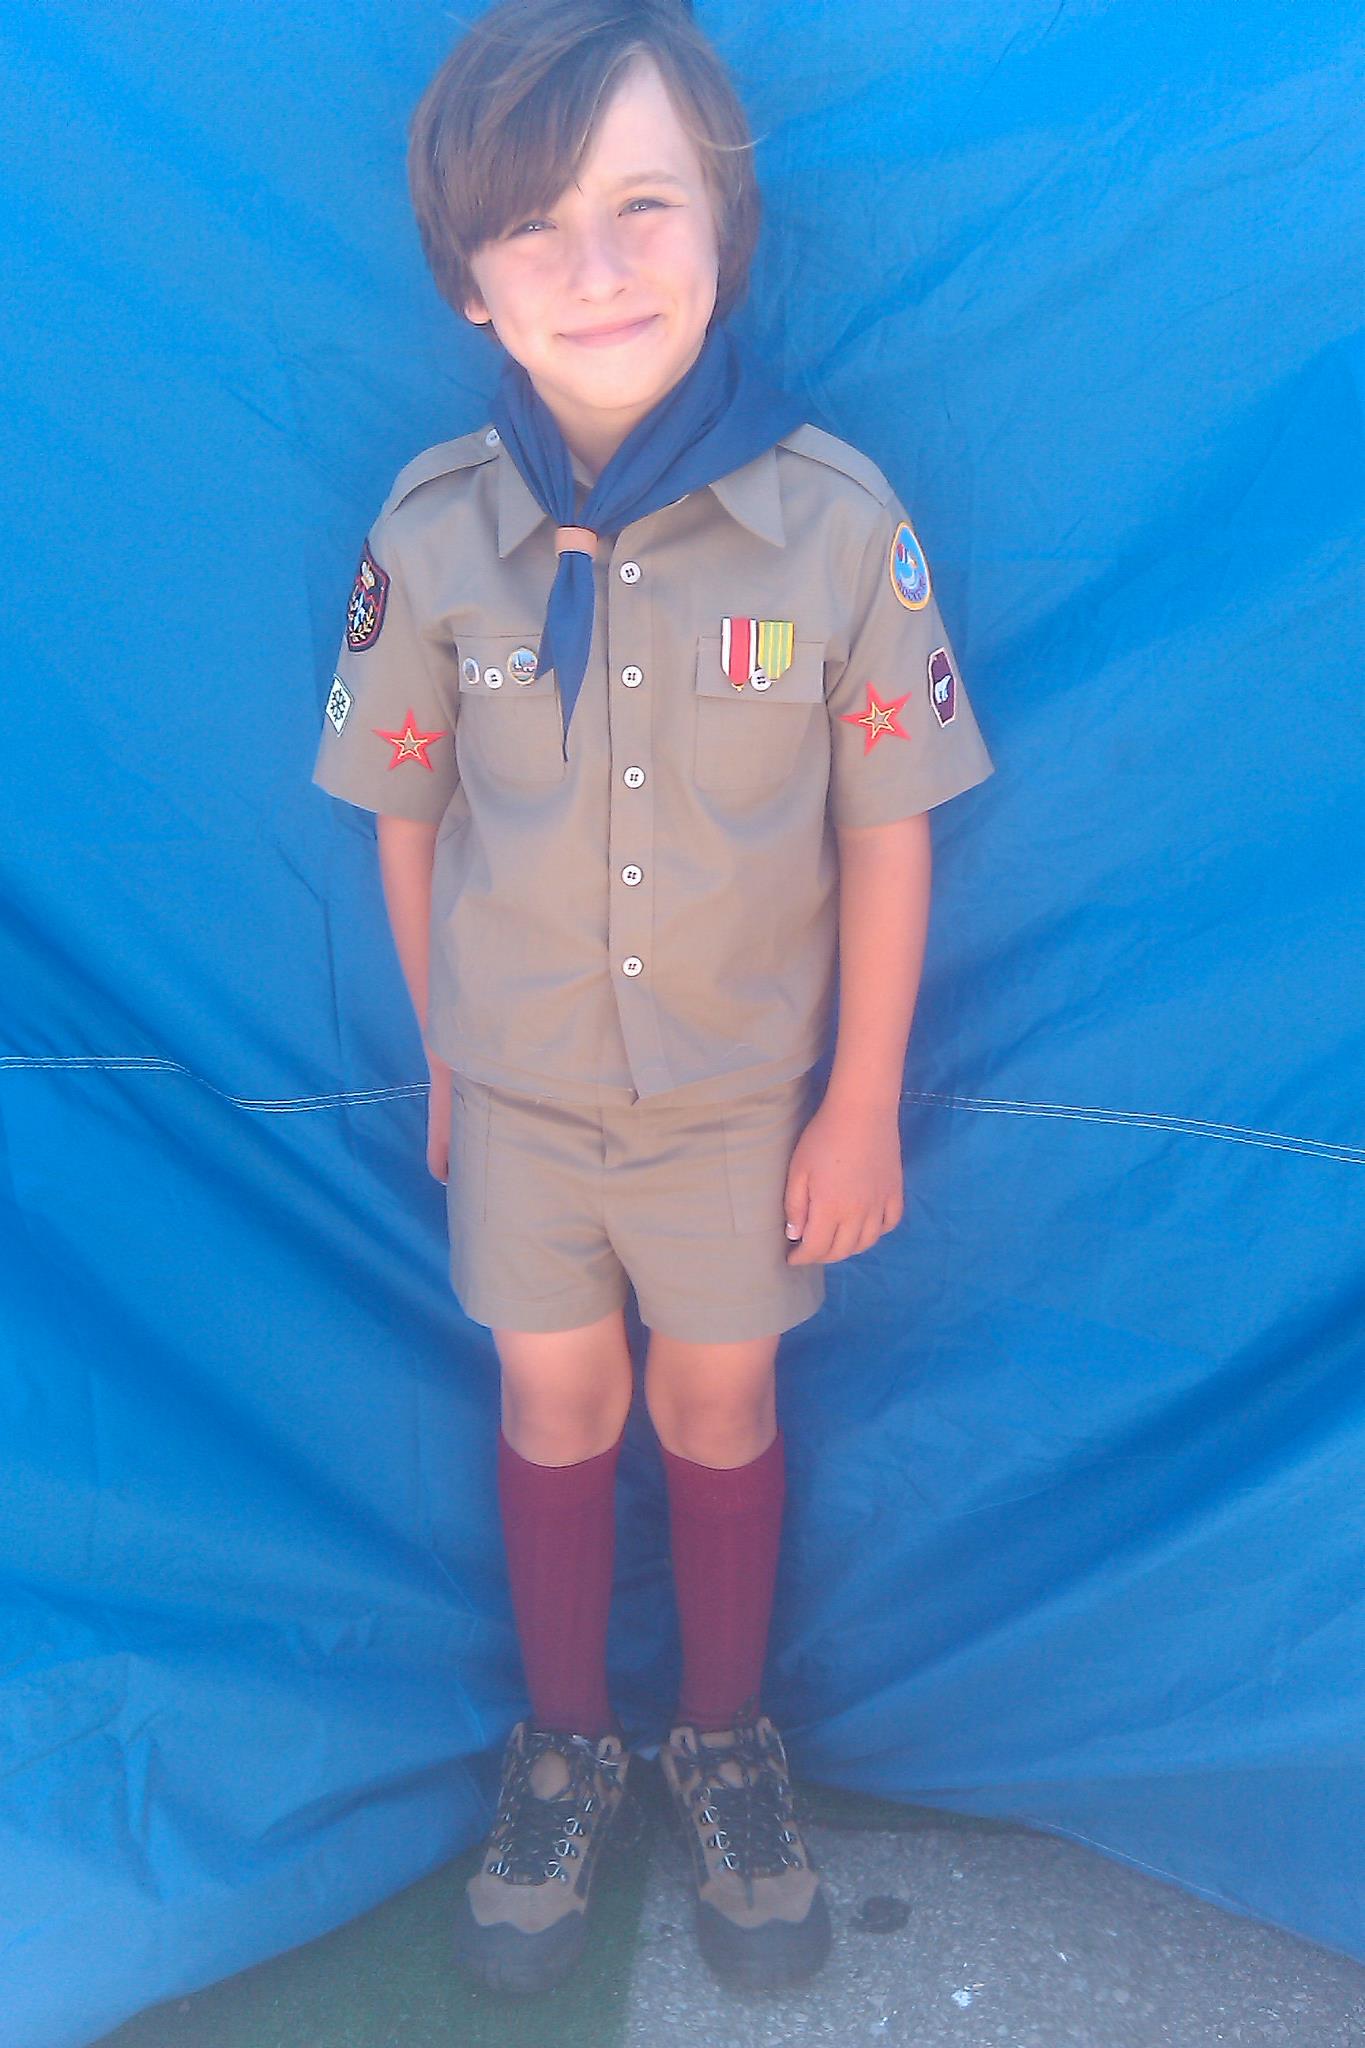 Cameron on the set of The Muppets as a Scout 2011